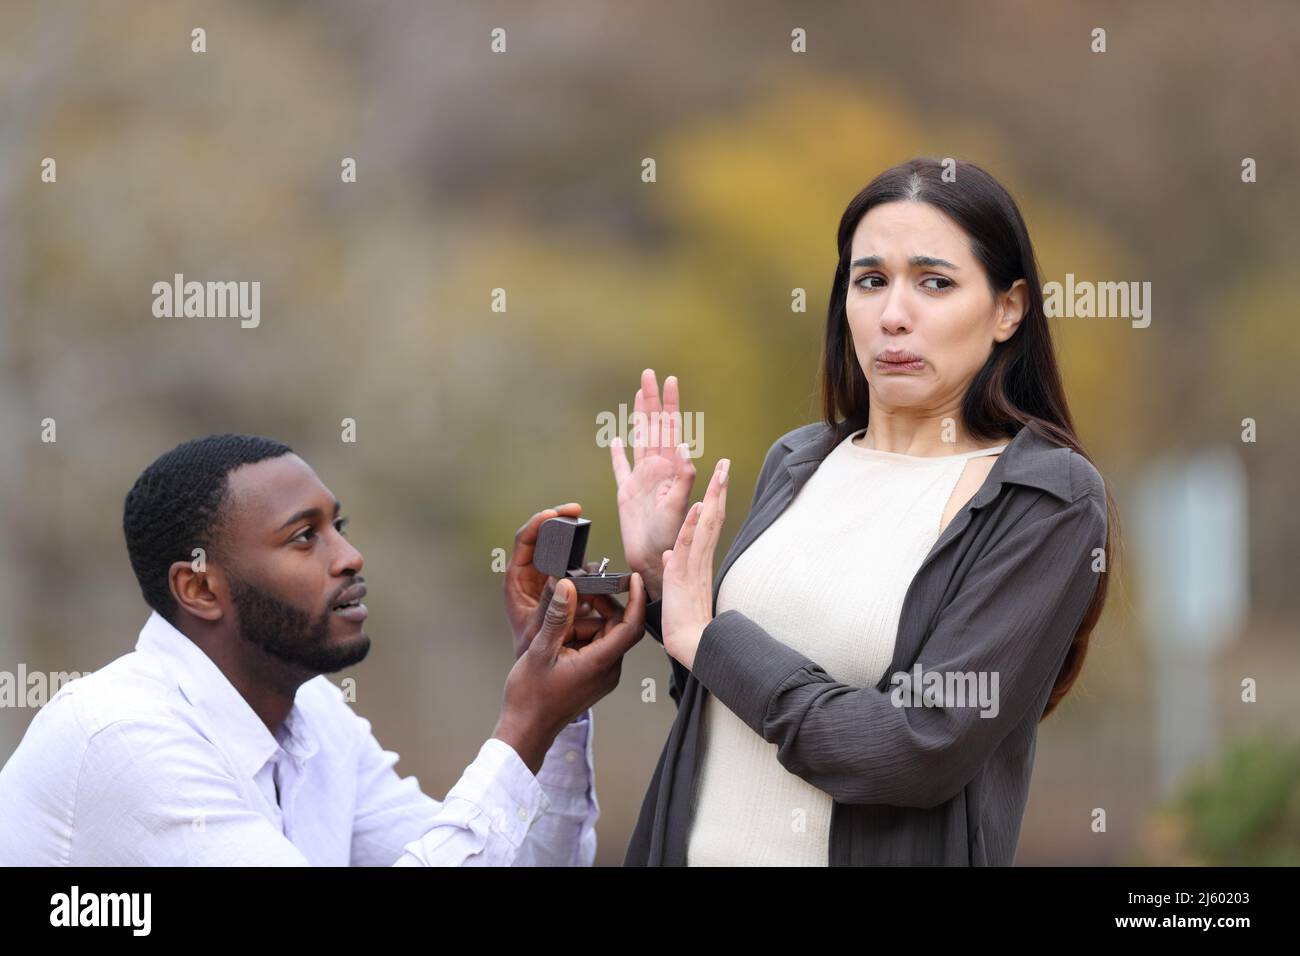 Stressed man with black skin proposing marriage and scared caucasian woman rejecting him in a park Stock Photo